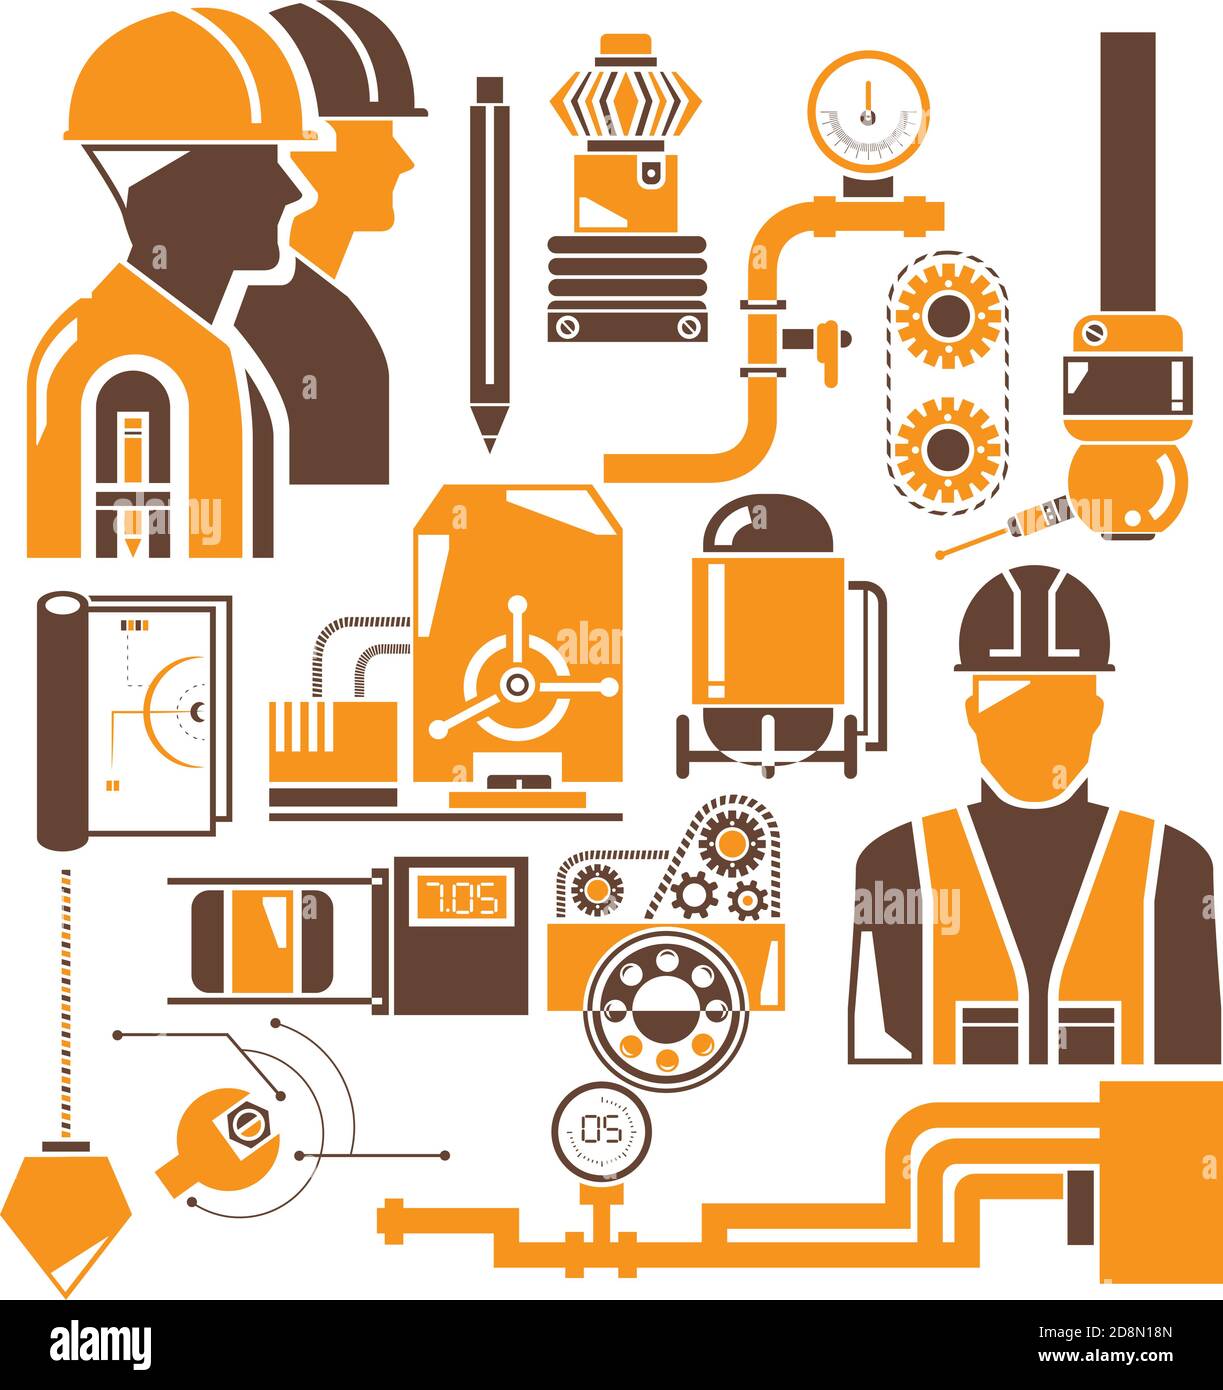 automation, and industrial engineering management icons Stock Vector